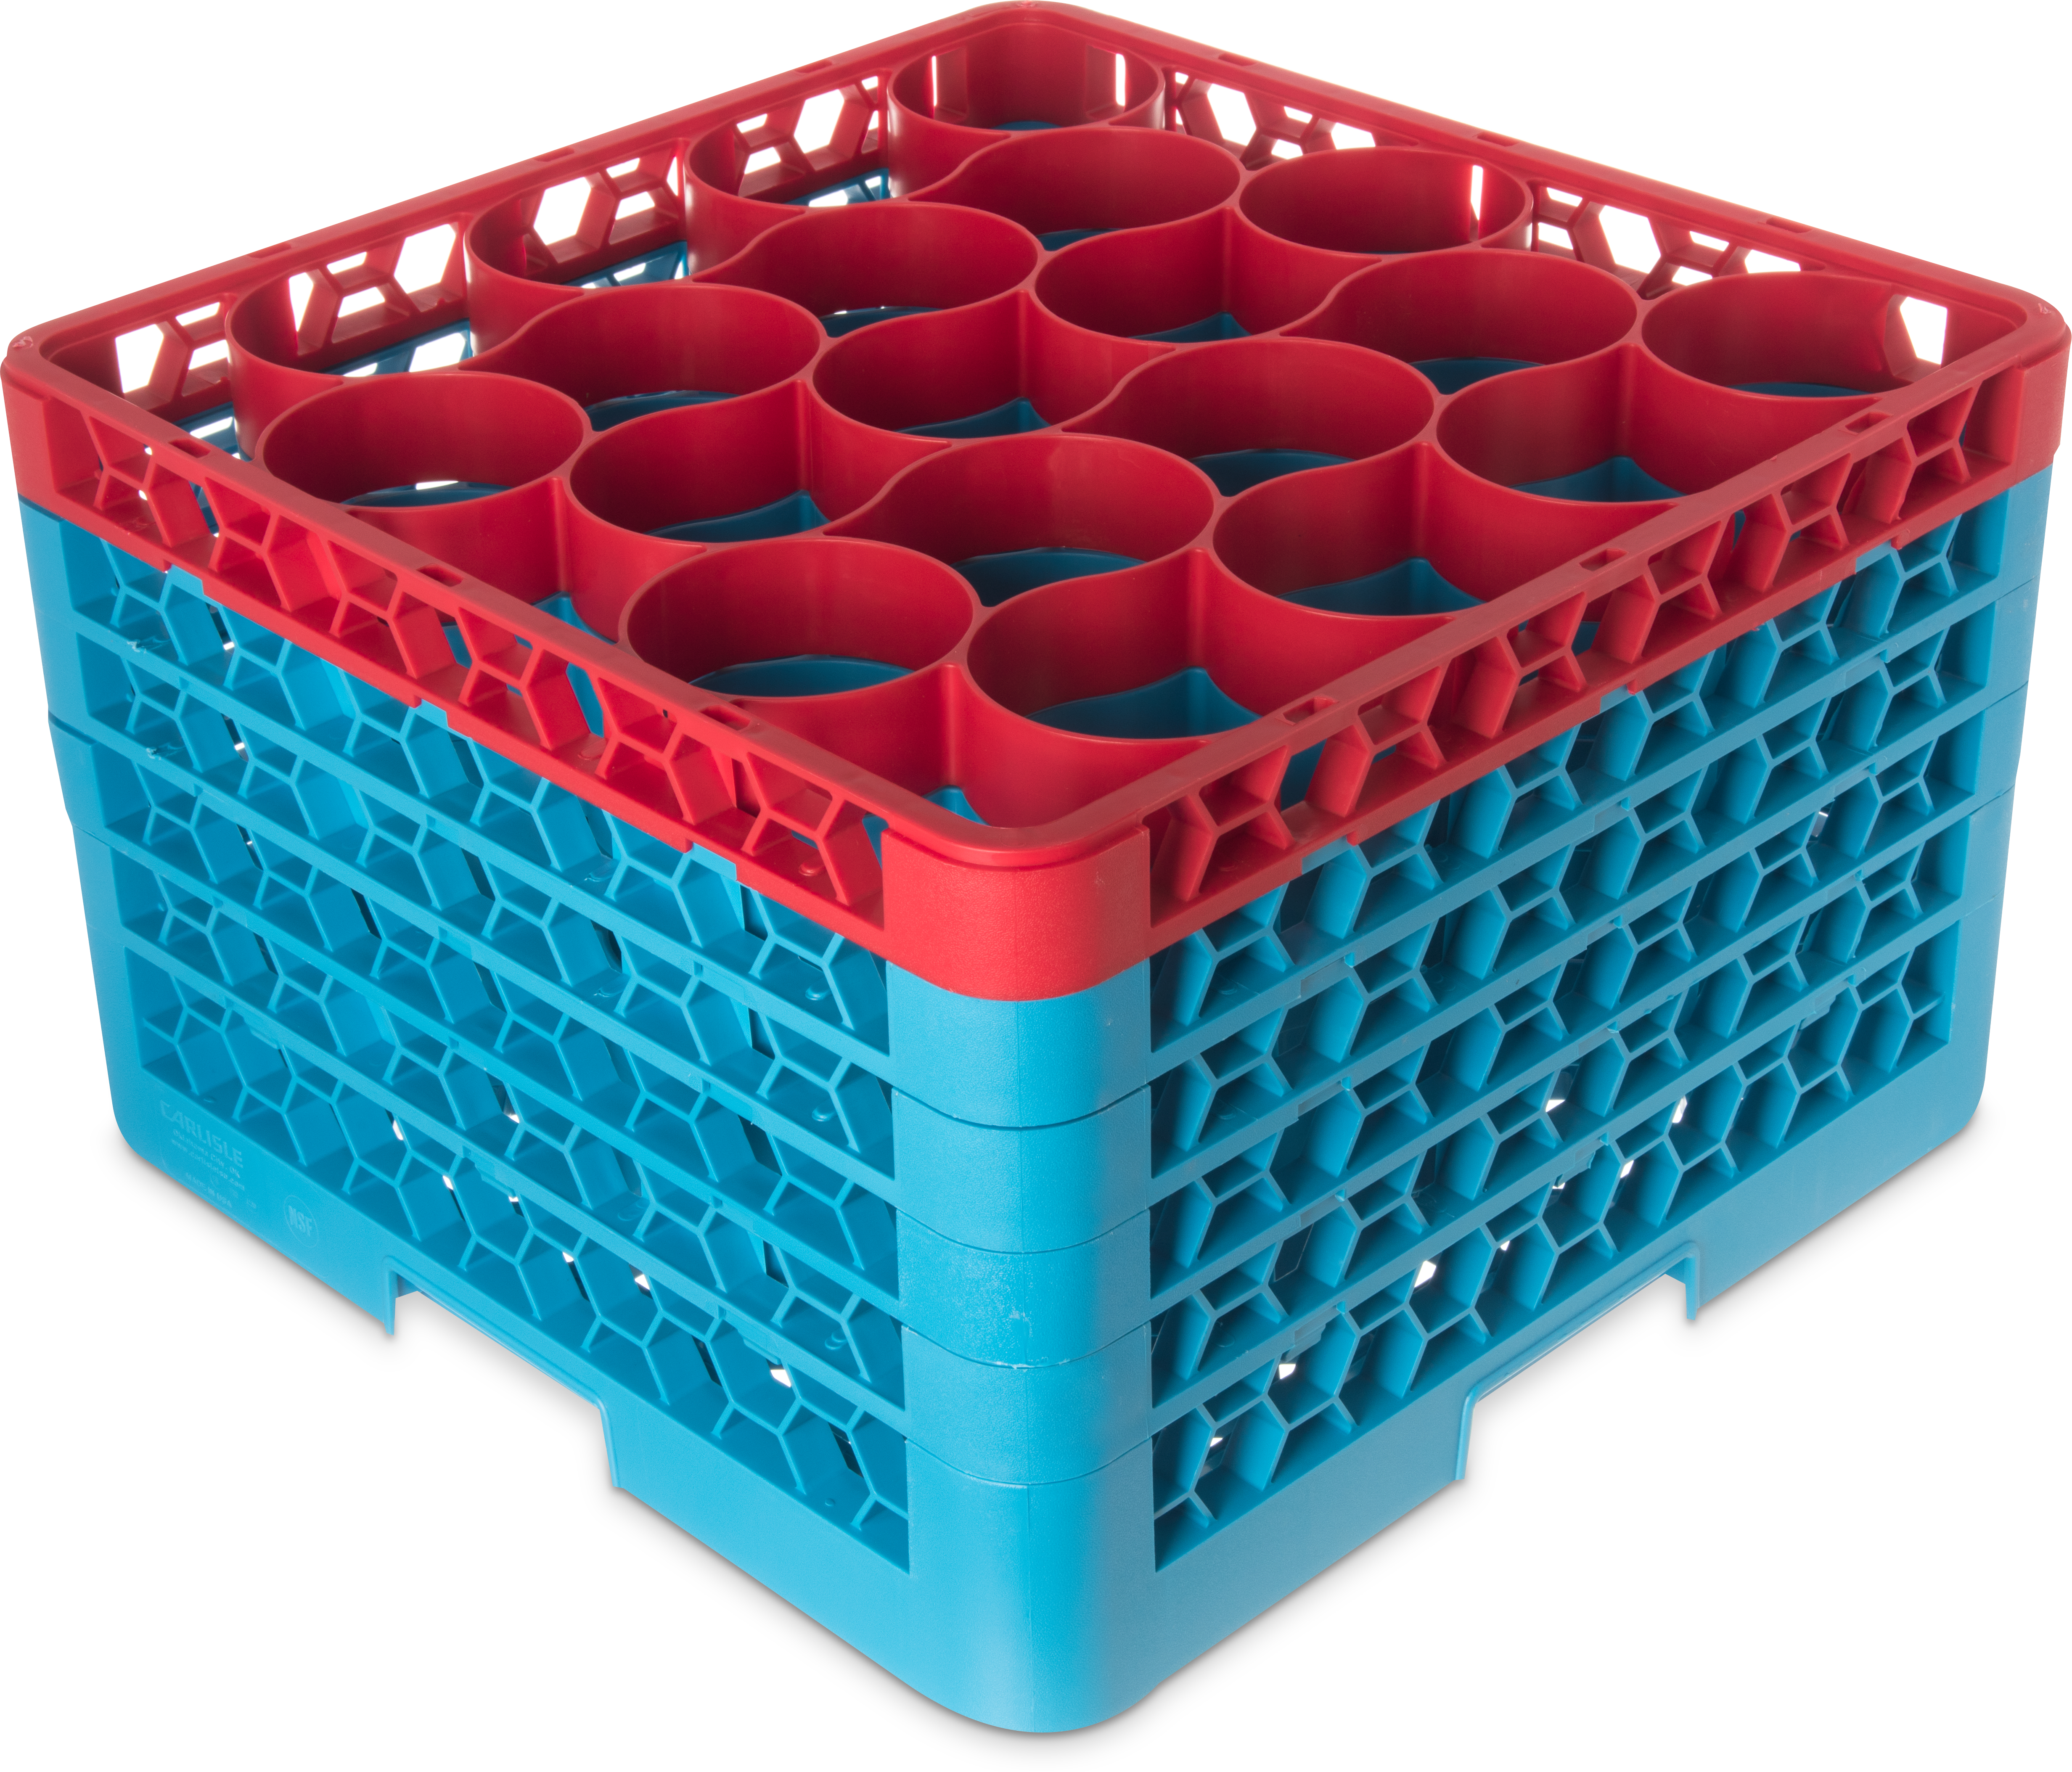 OptiClean NeWave Color-Coded Glass Rack with Five Extenders 20 Compartment - Red-Carlisle Blue